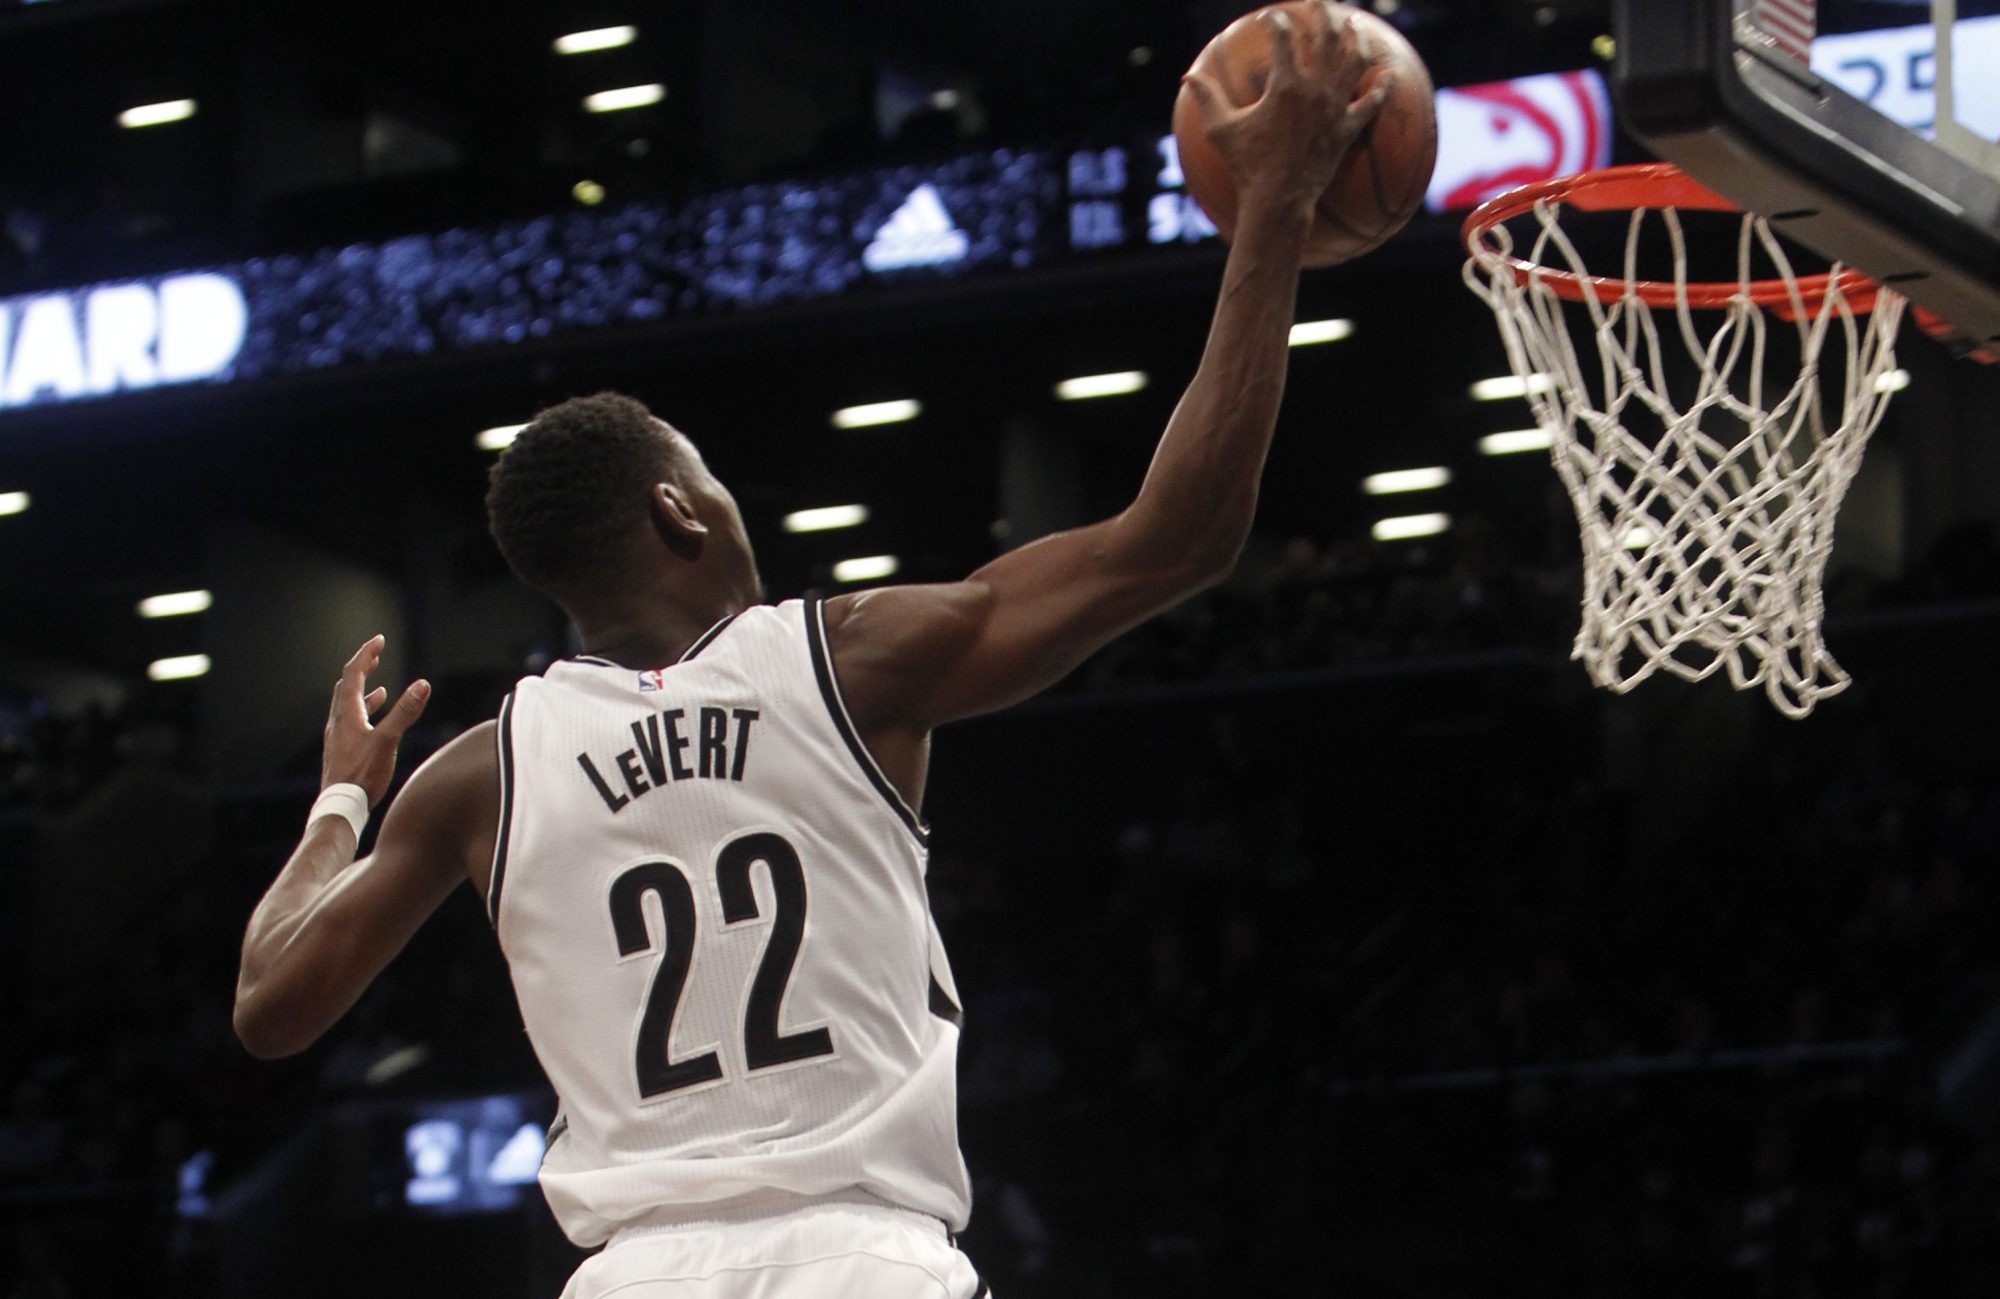 Caris LeVert, Archie Goodwin Dazzle In Thrashing of Pelicans 